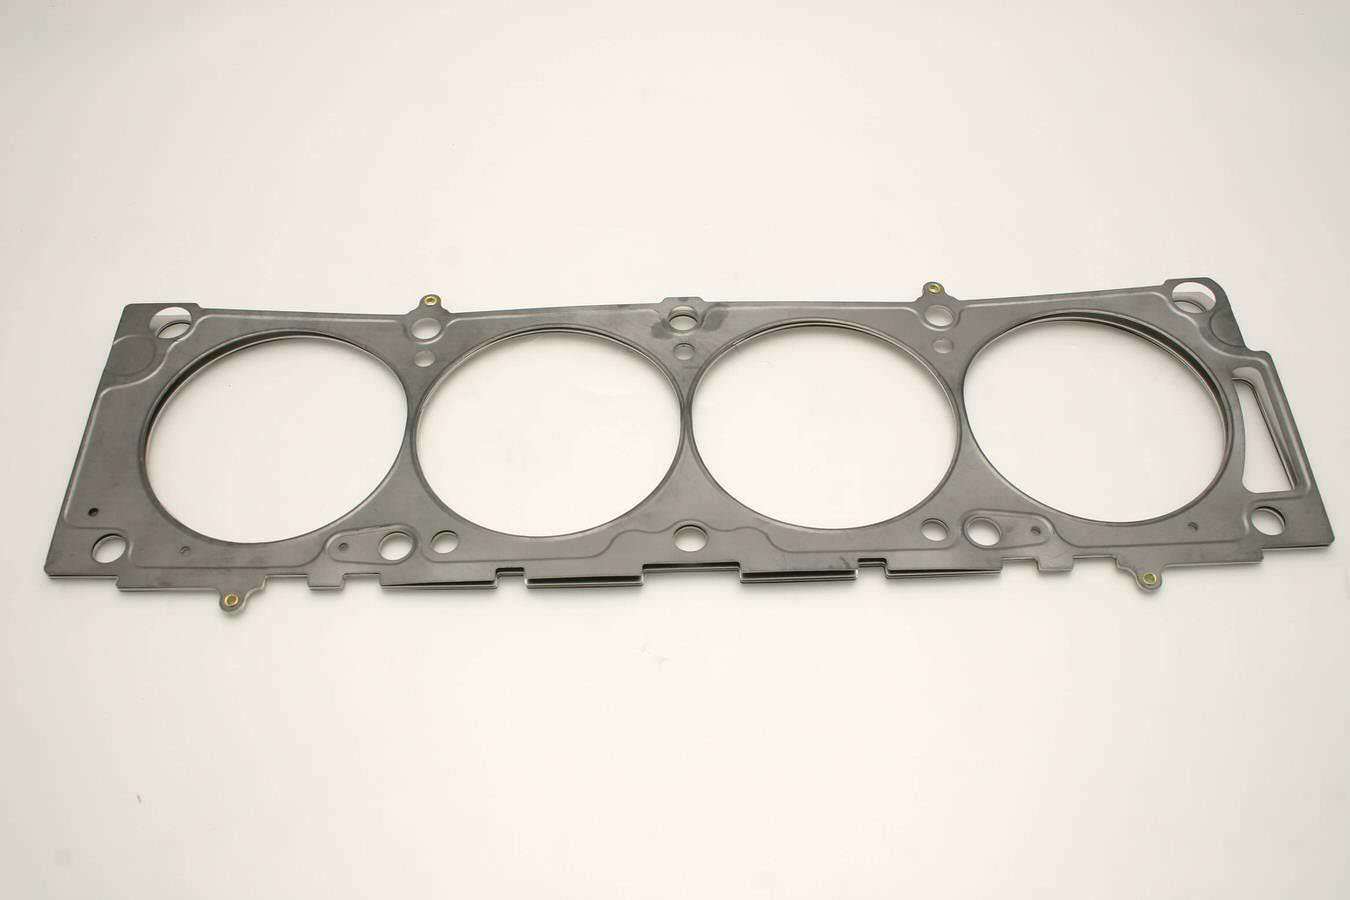 Cometic Gasket C5324-040 MLS .040 Thickness 4.200 Head Gasket for Small Block Chevy SB2 